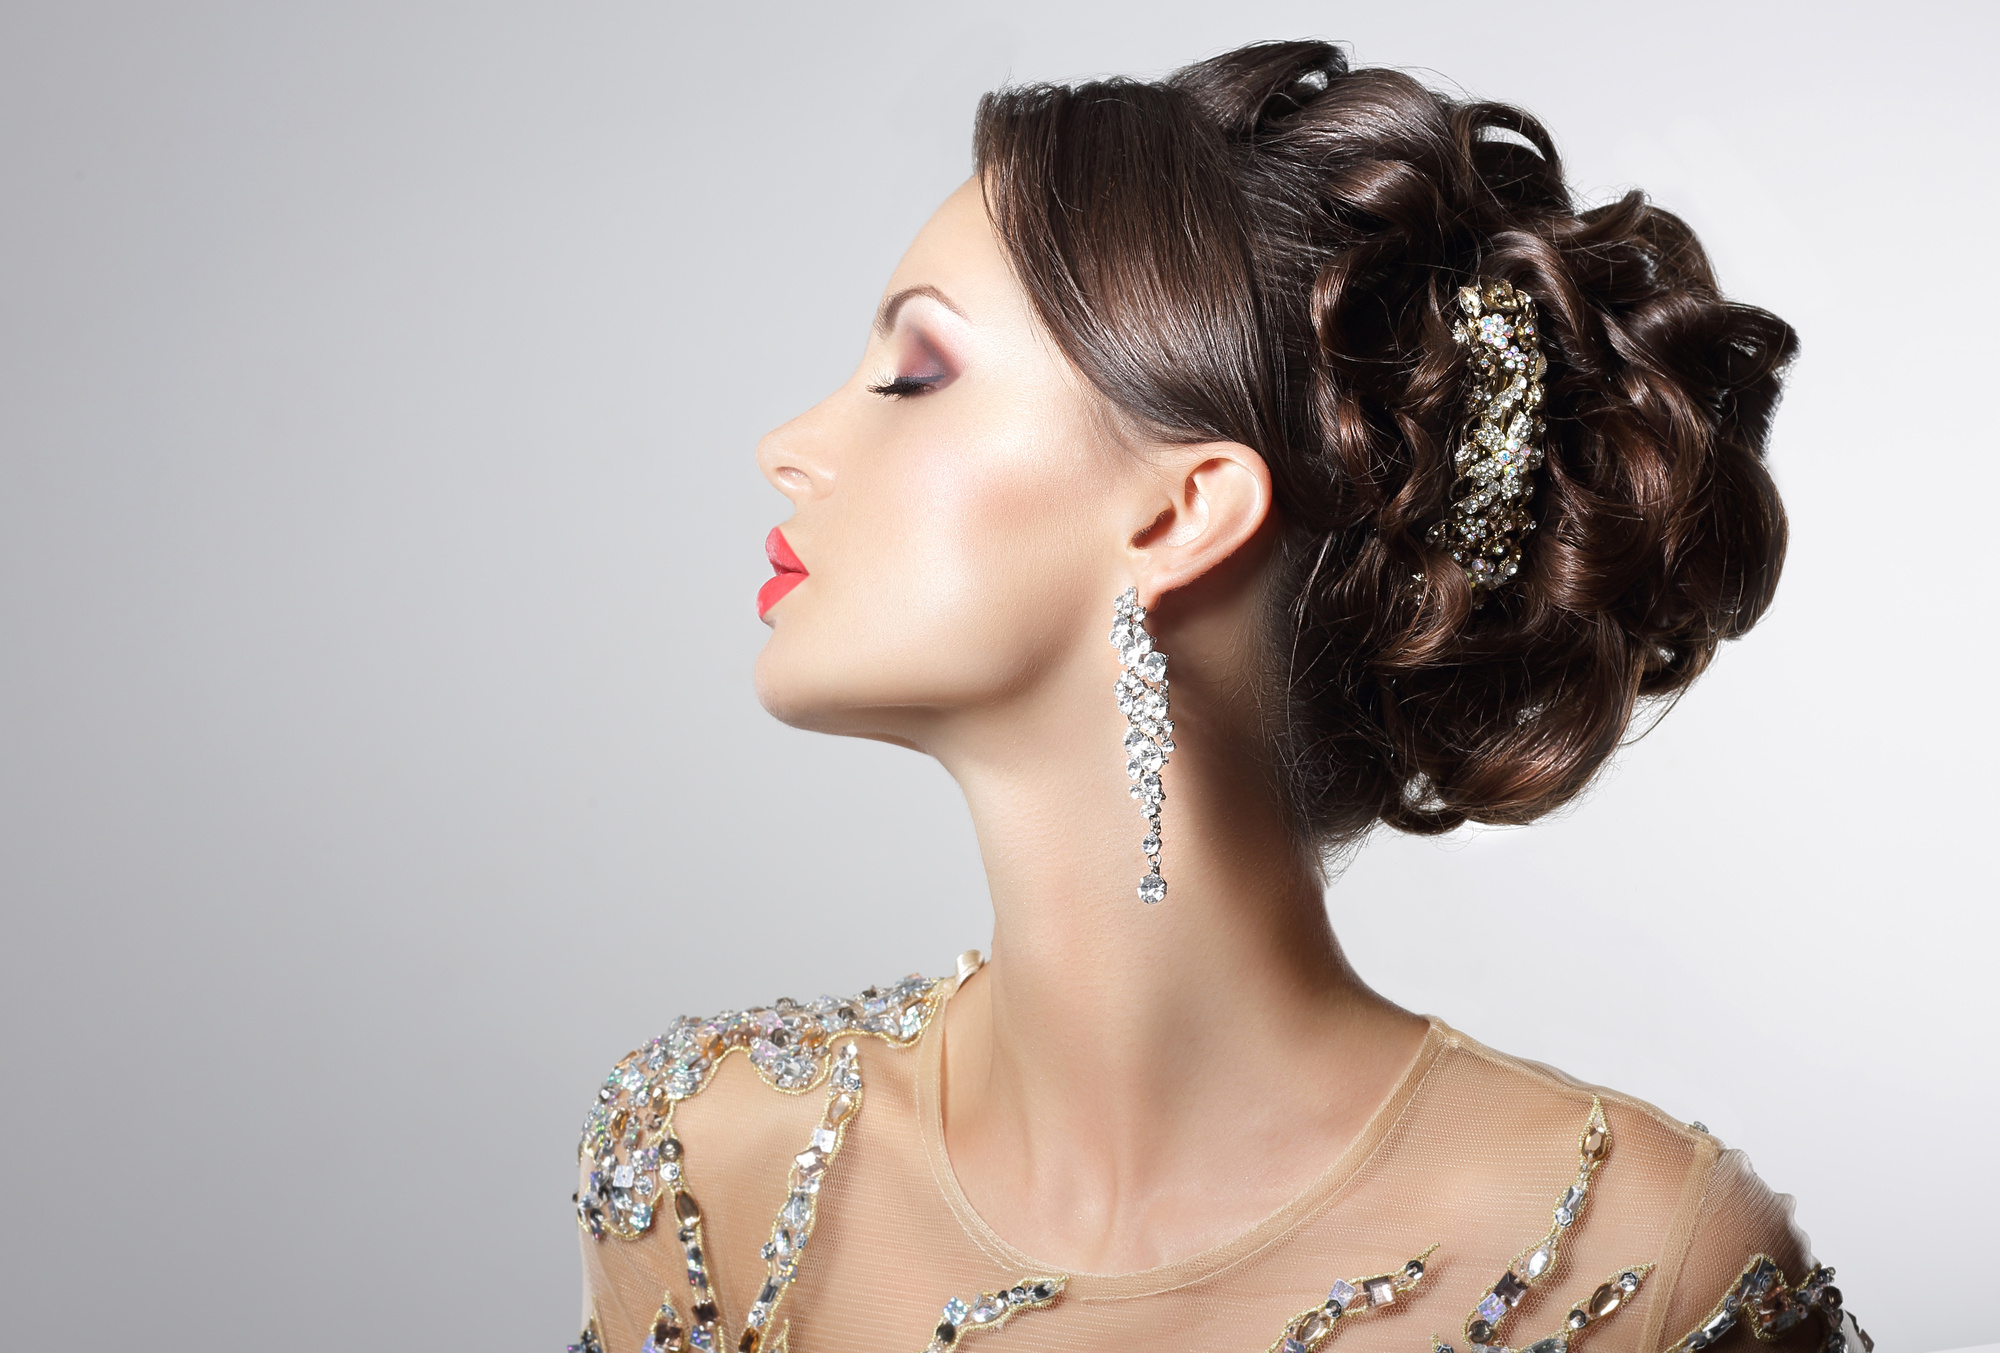 3 Formal Updos to Make You Look Drop Dead Gorgeous